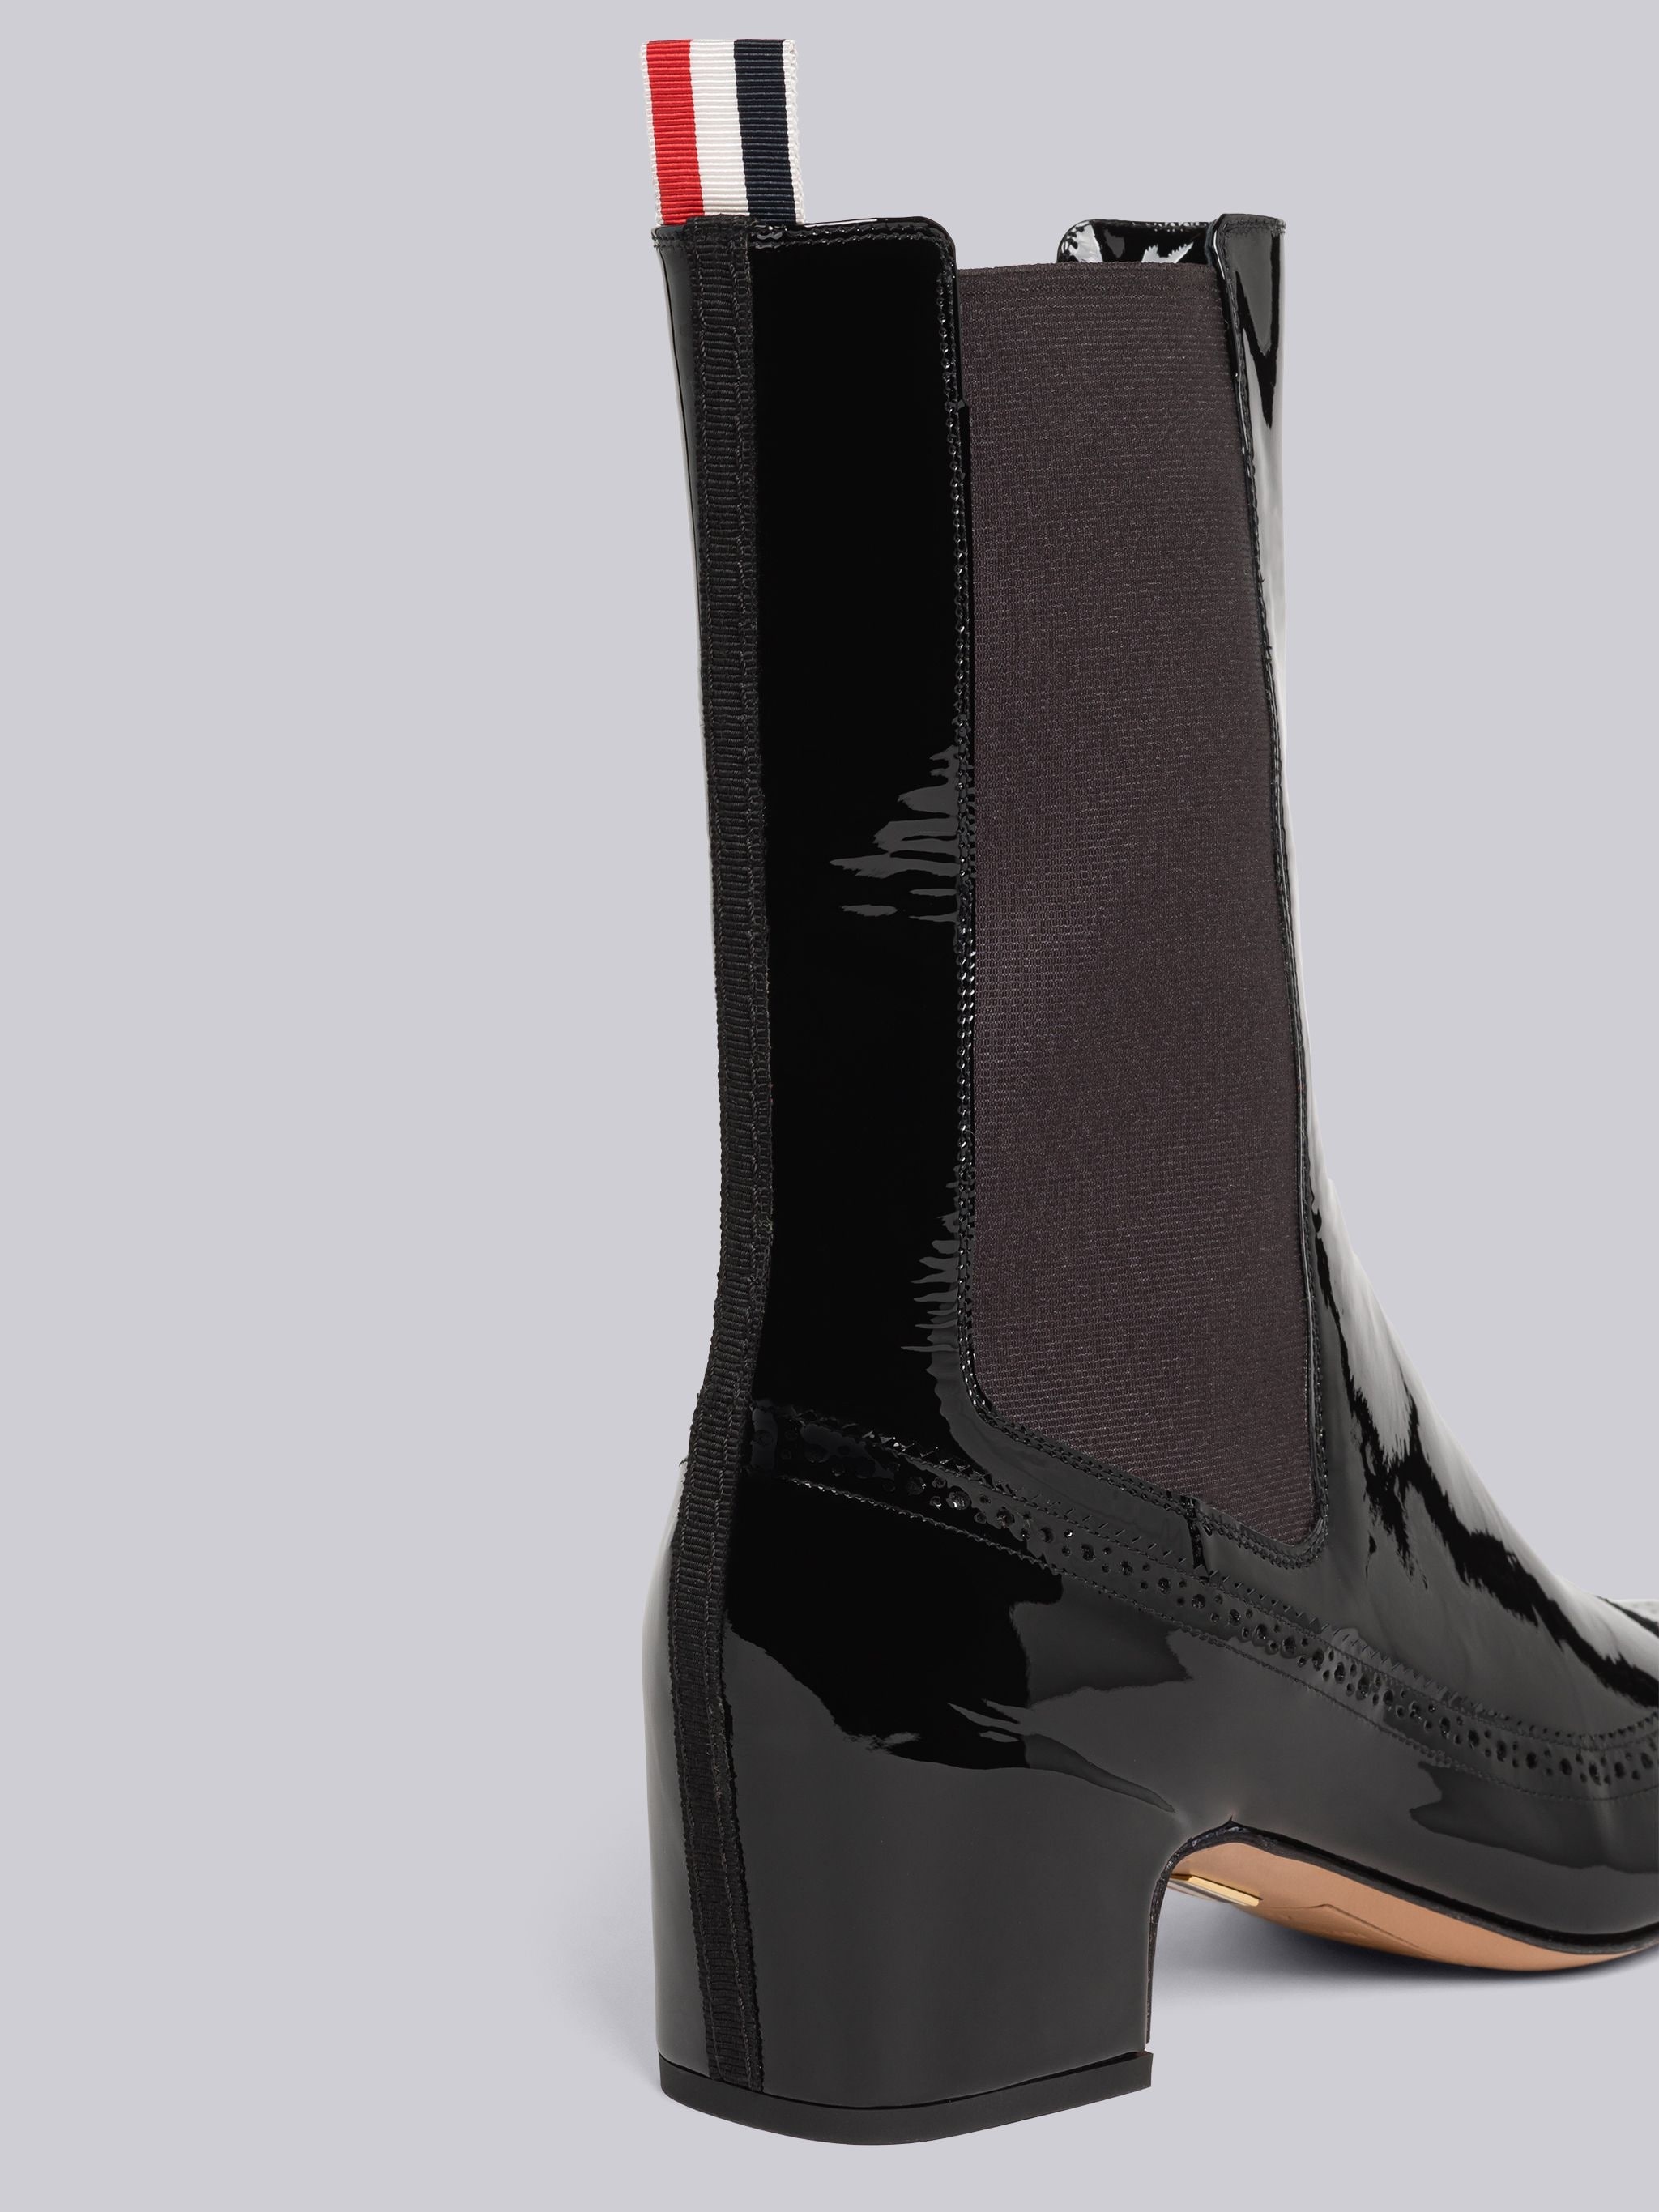 Soft Patent Leather Mid Calf 4-Bar Heeled Chelsea Boot - 2